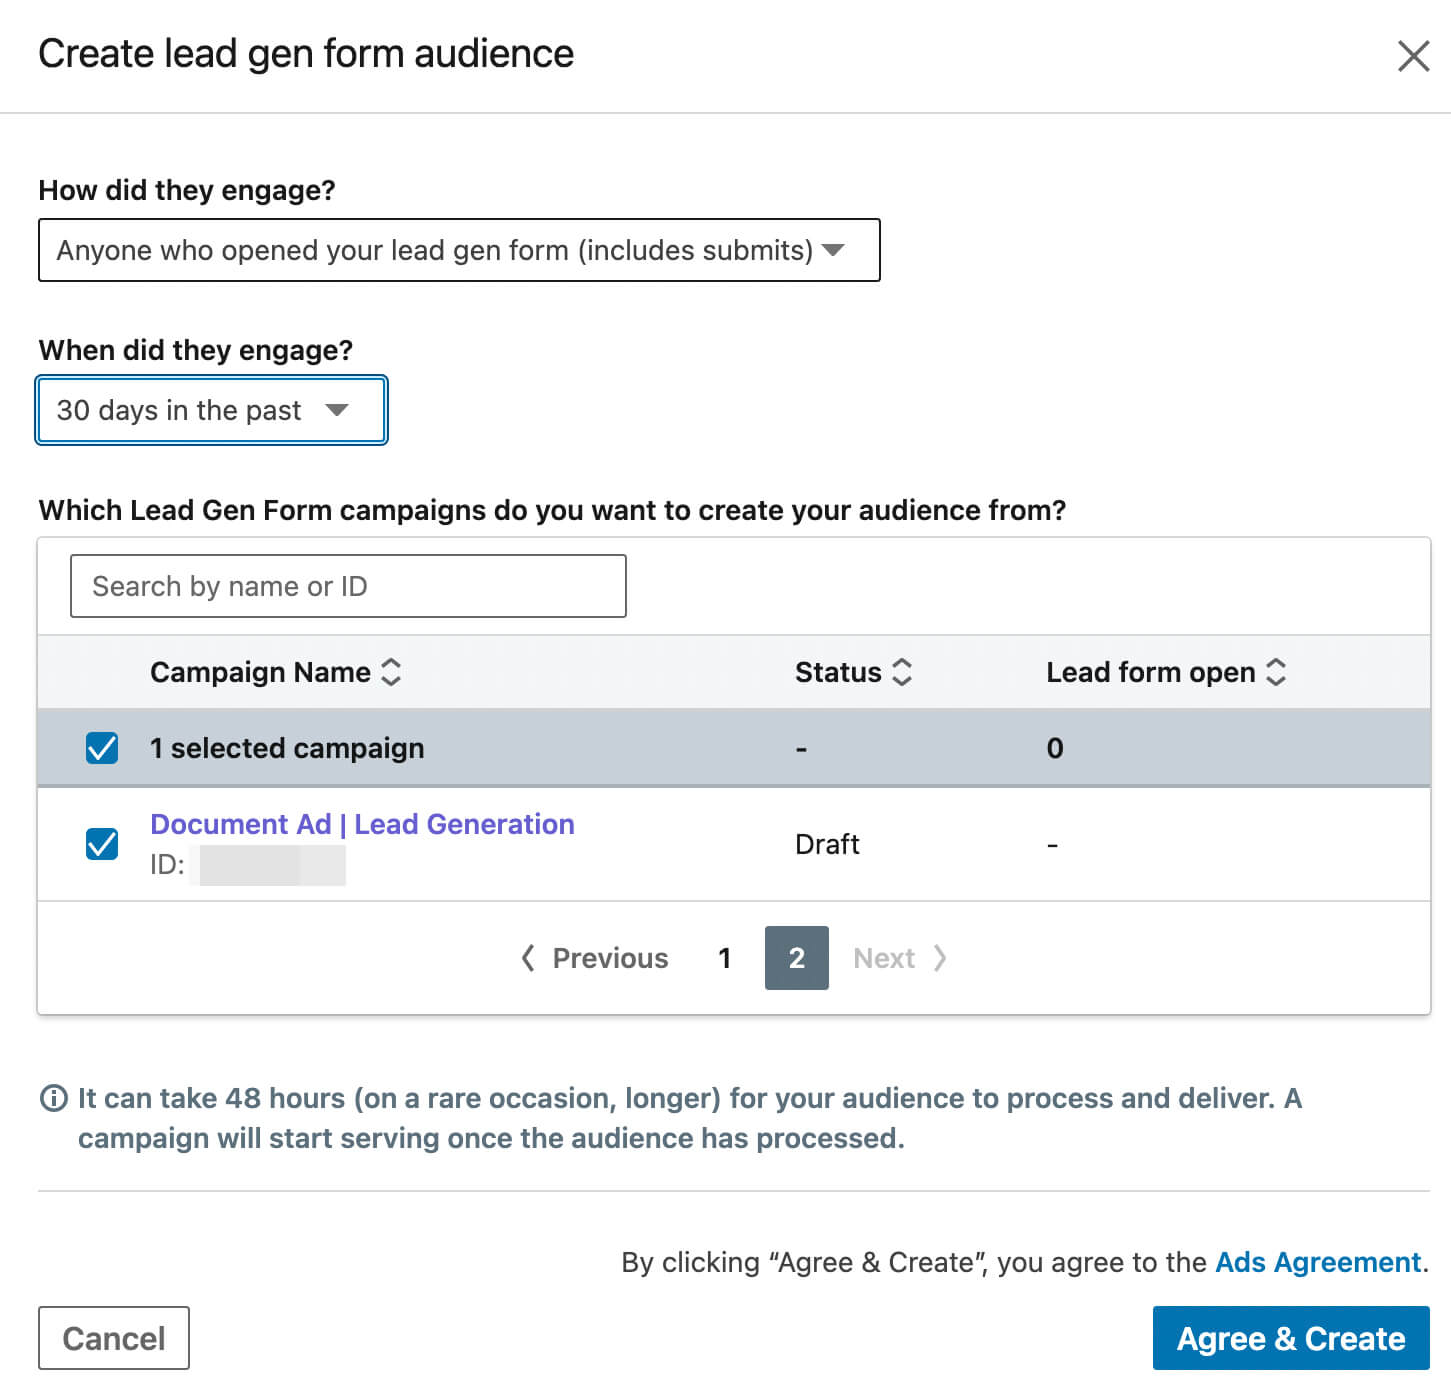 how-to-build-remarketing-audiences-with-linkedin-document-ads-retargeting-based-on-lead-forms-audience-source-conversion-focused-campaigns-example-1